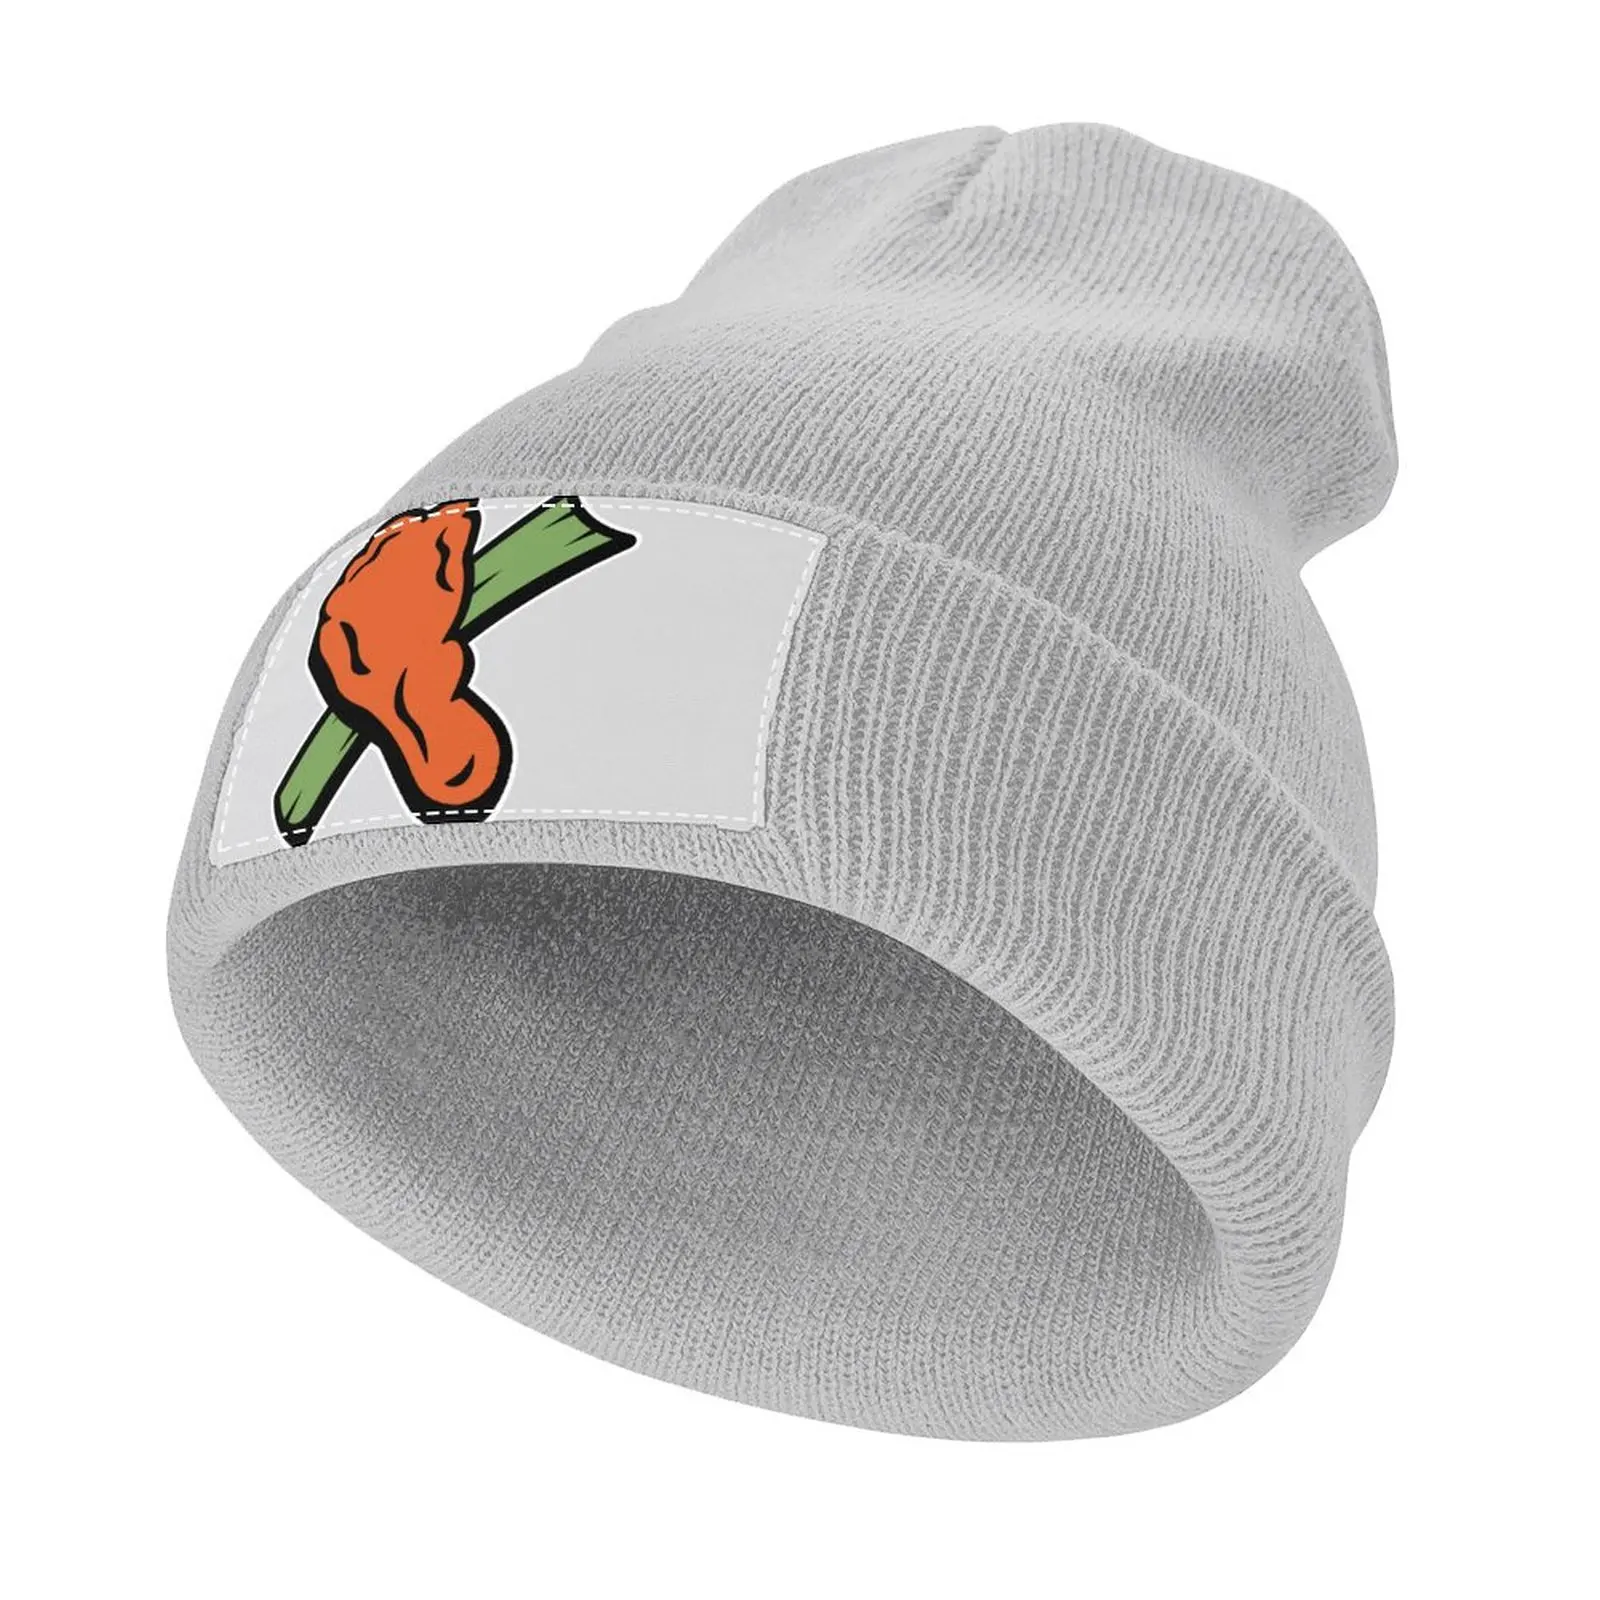 

Buffalo Chicken Wing Drumstick and Celery Knitted Hat Golf Luxury Man Hat Snap Back Hat Luxury Cap Hats For Men Women's